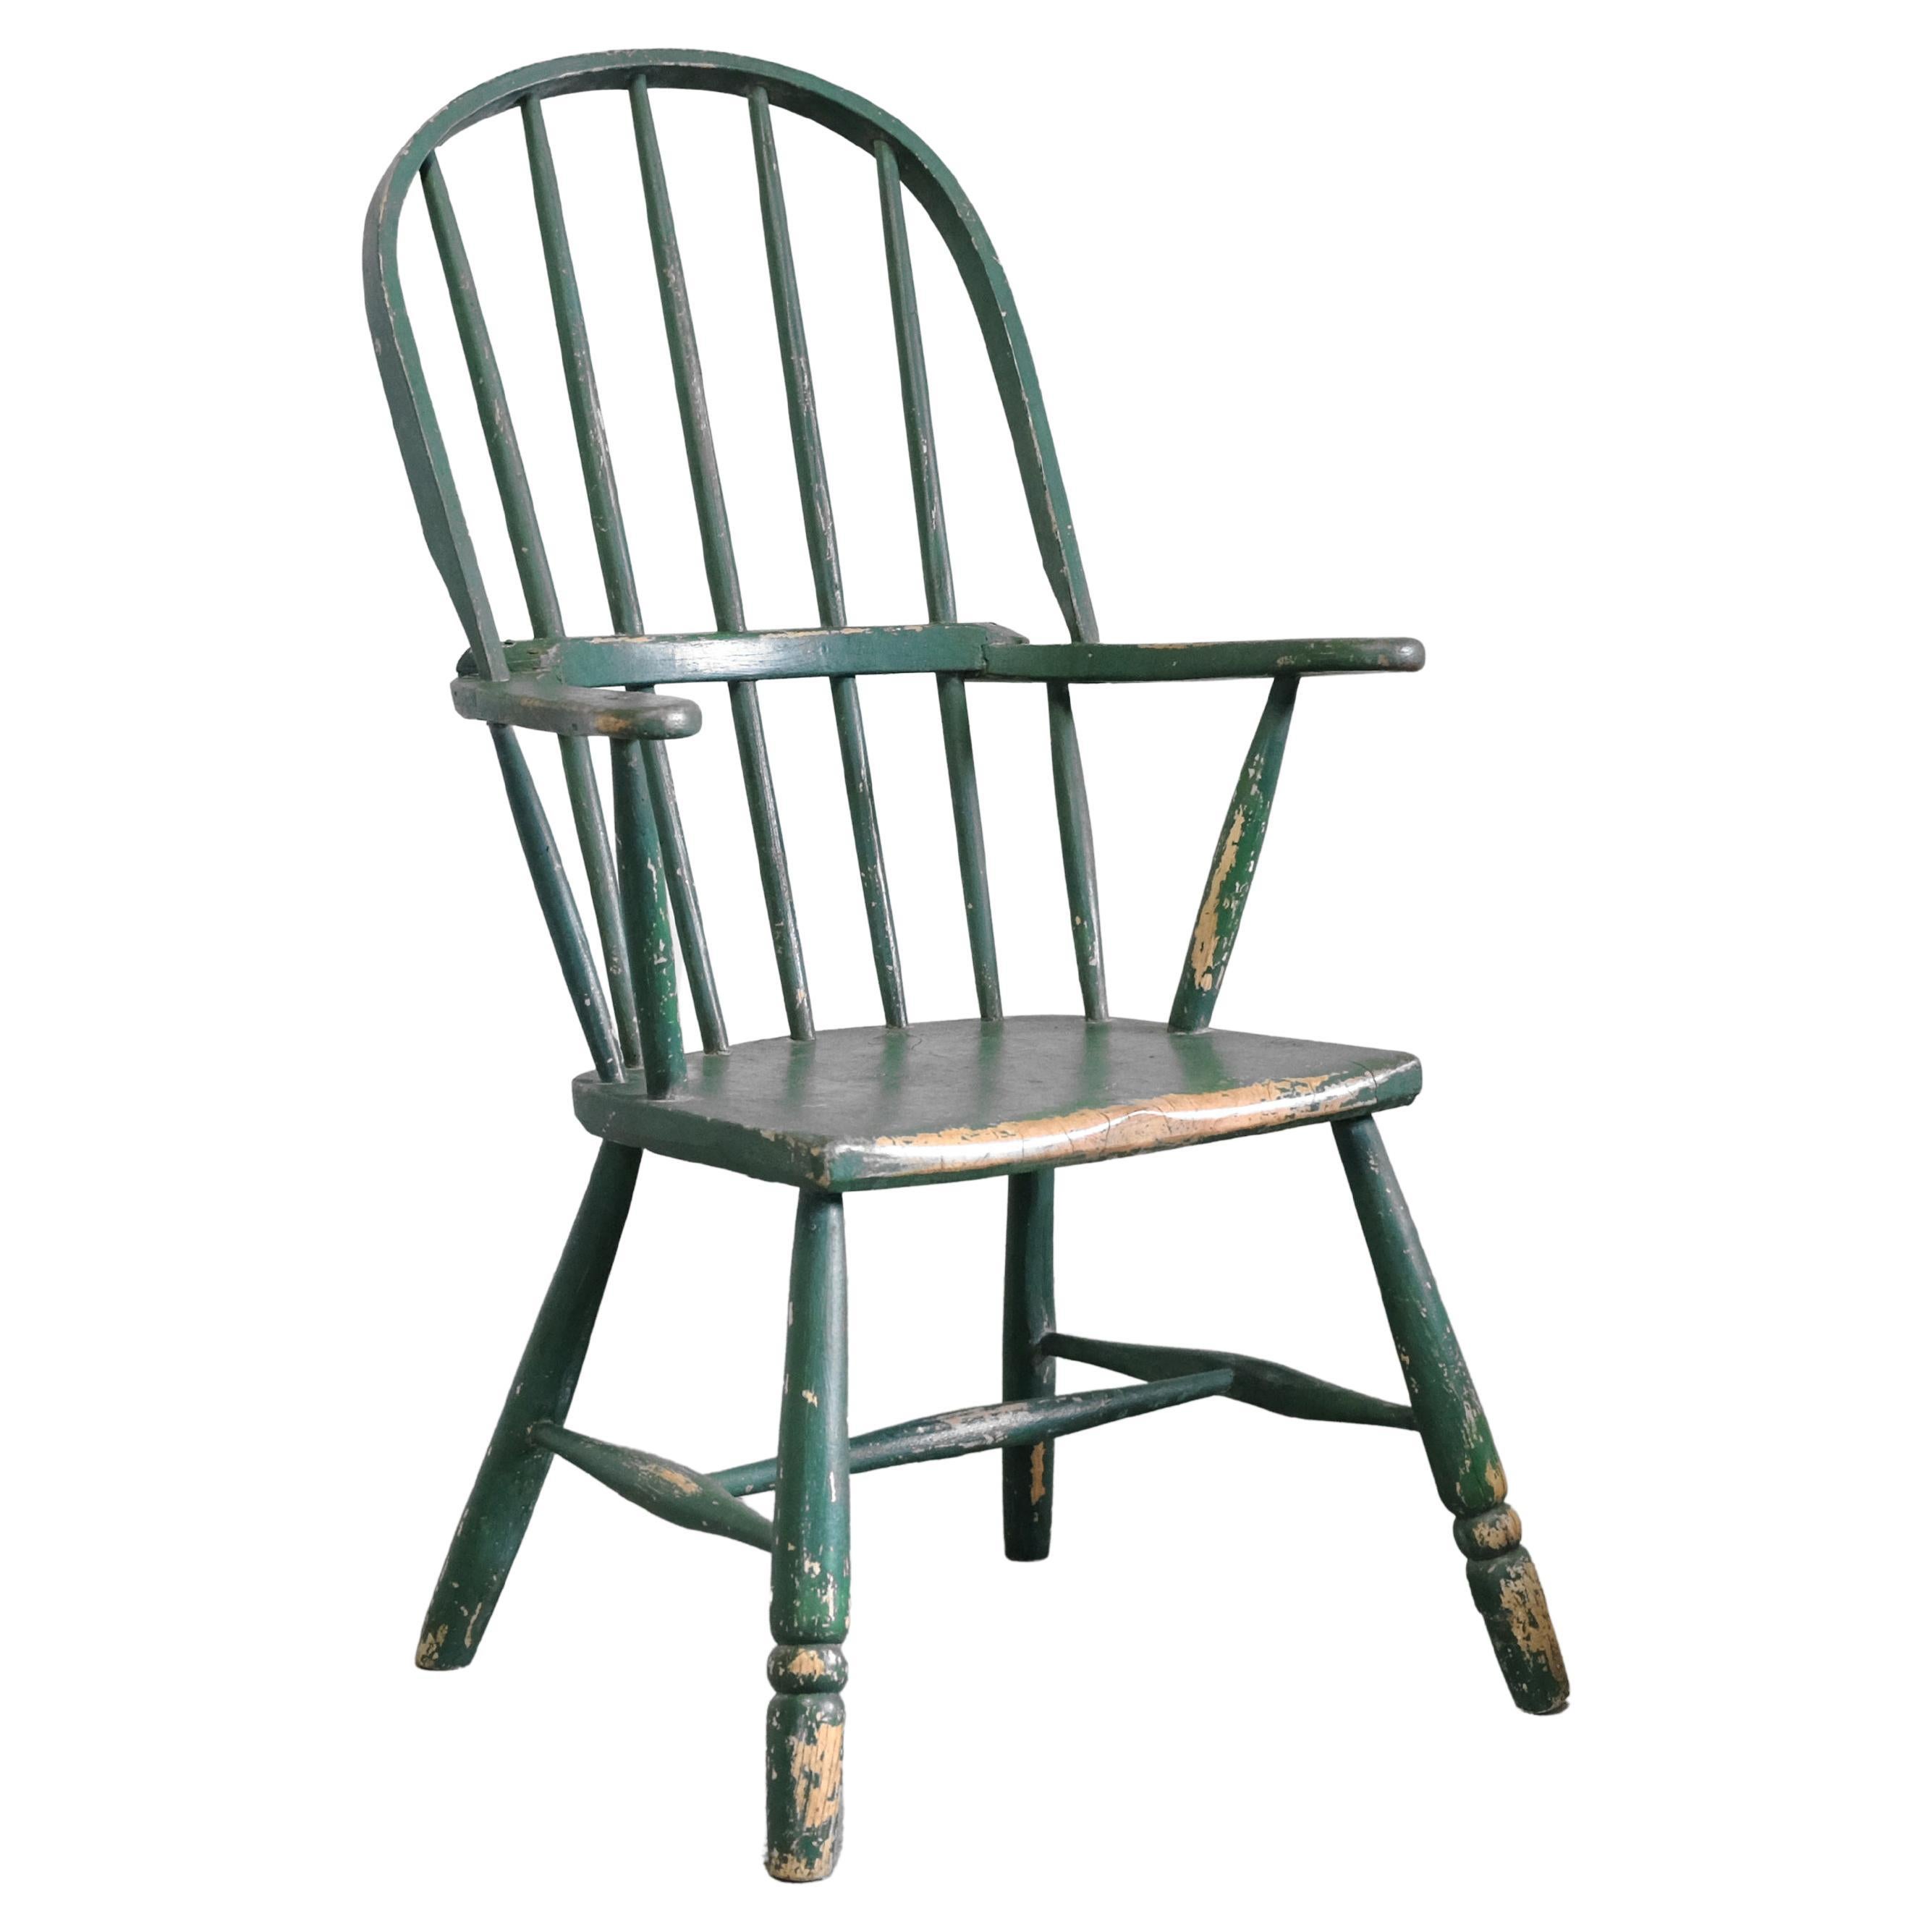 Early 19th Century Painted English West Country Windsor Stick Chair in Green